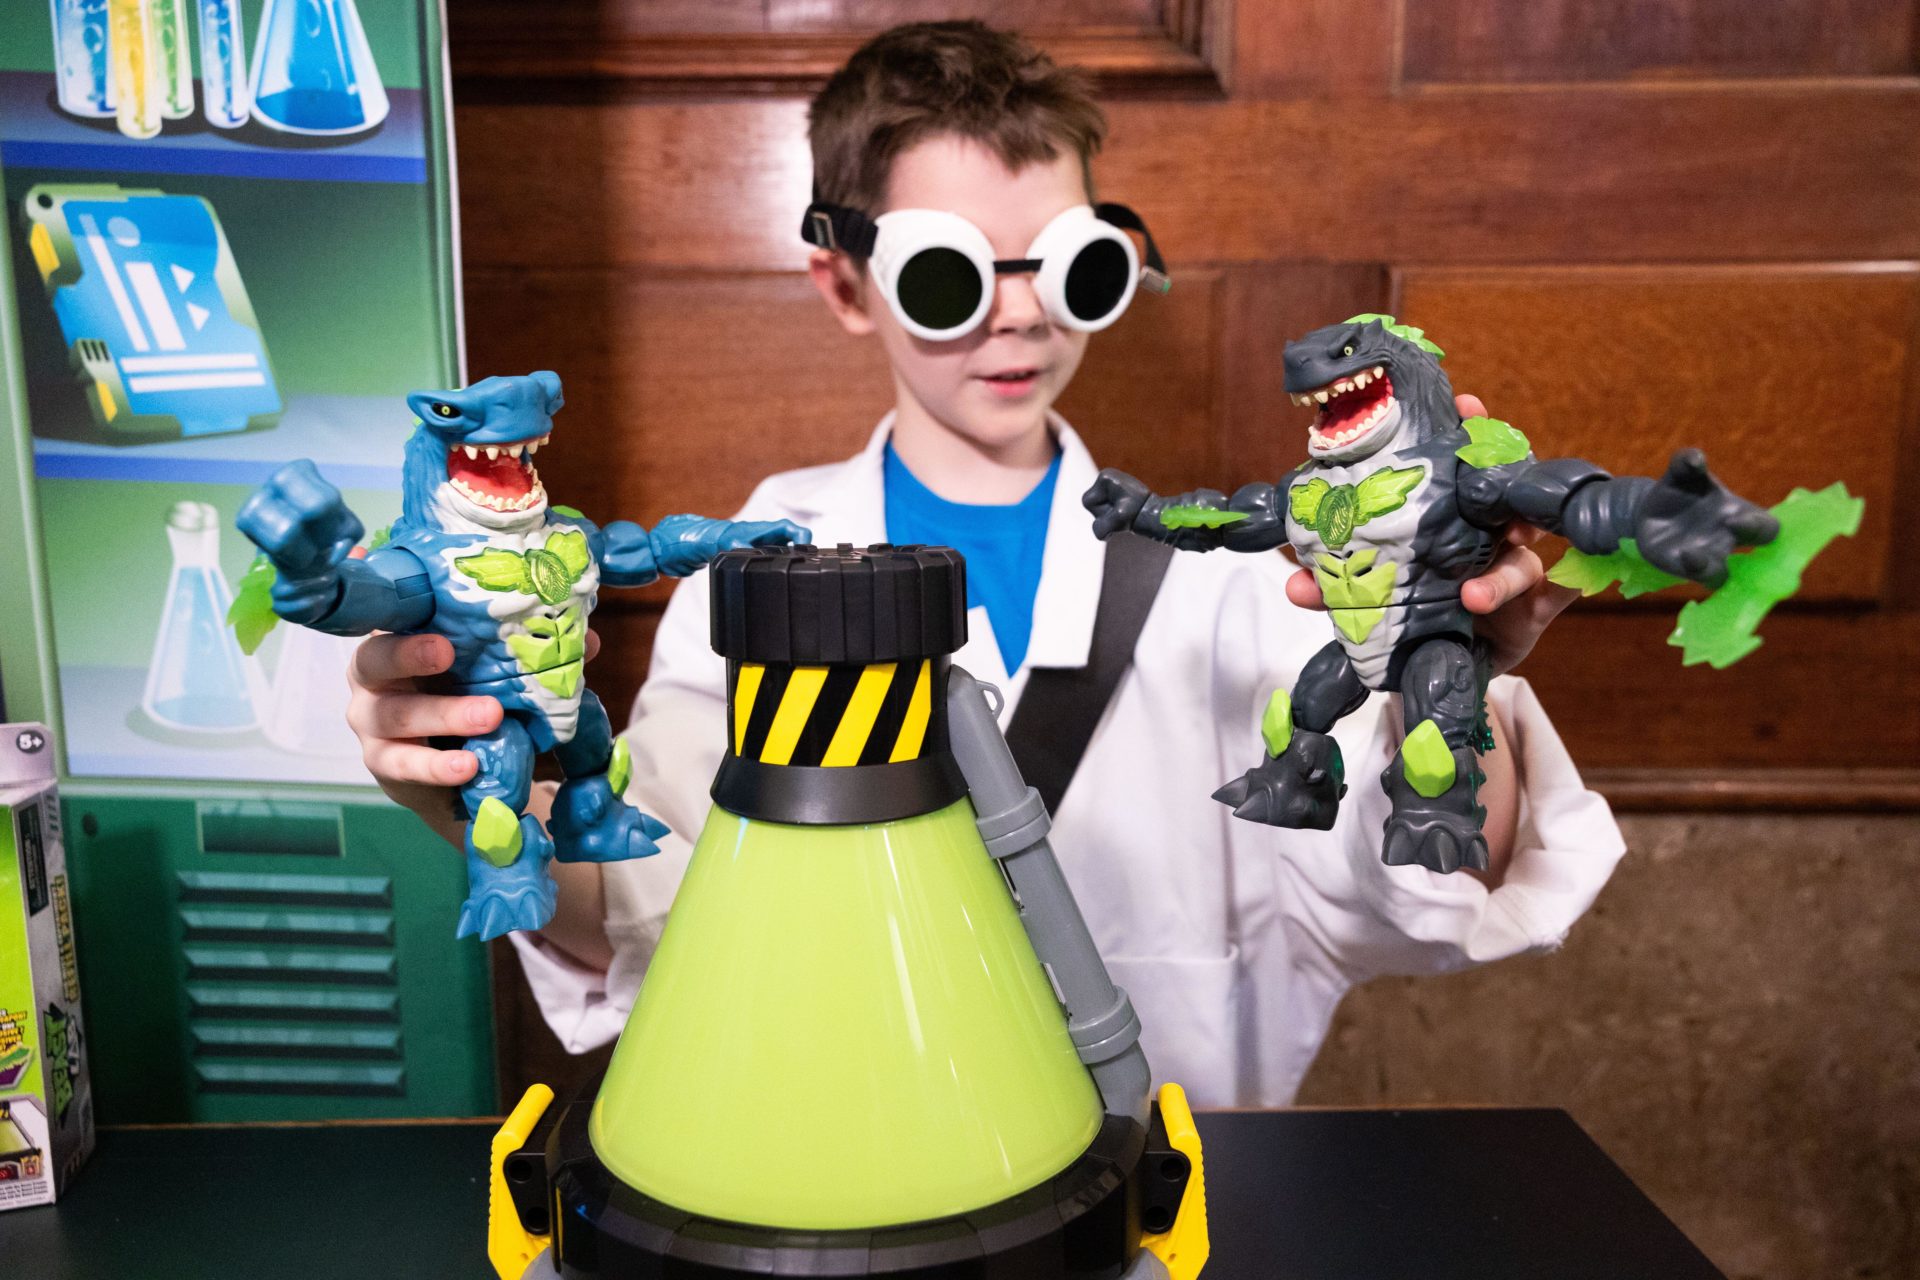 Eight-year-old Mason plays with ‘Beast Lab’ at Dreamtoys